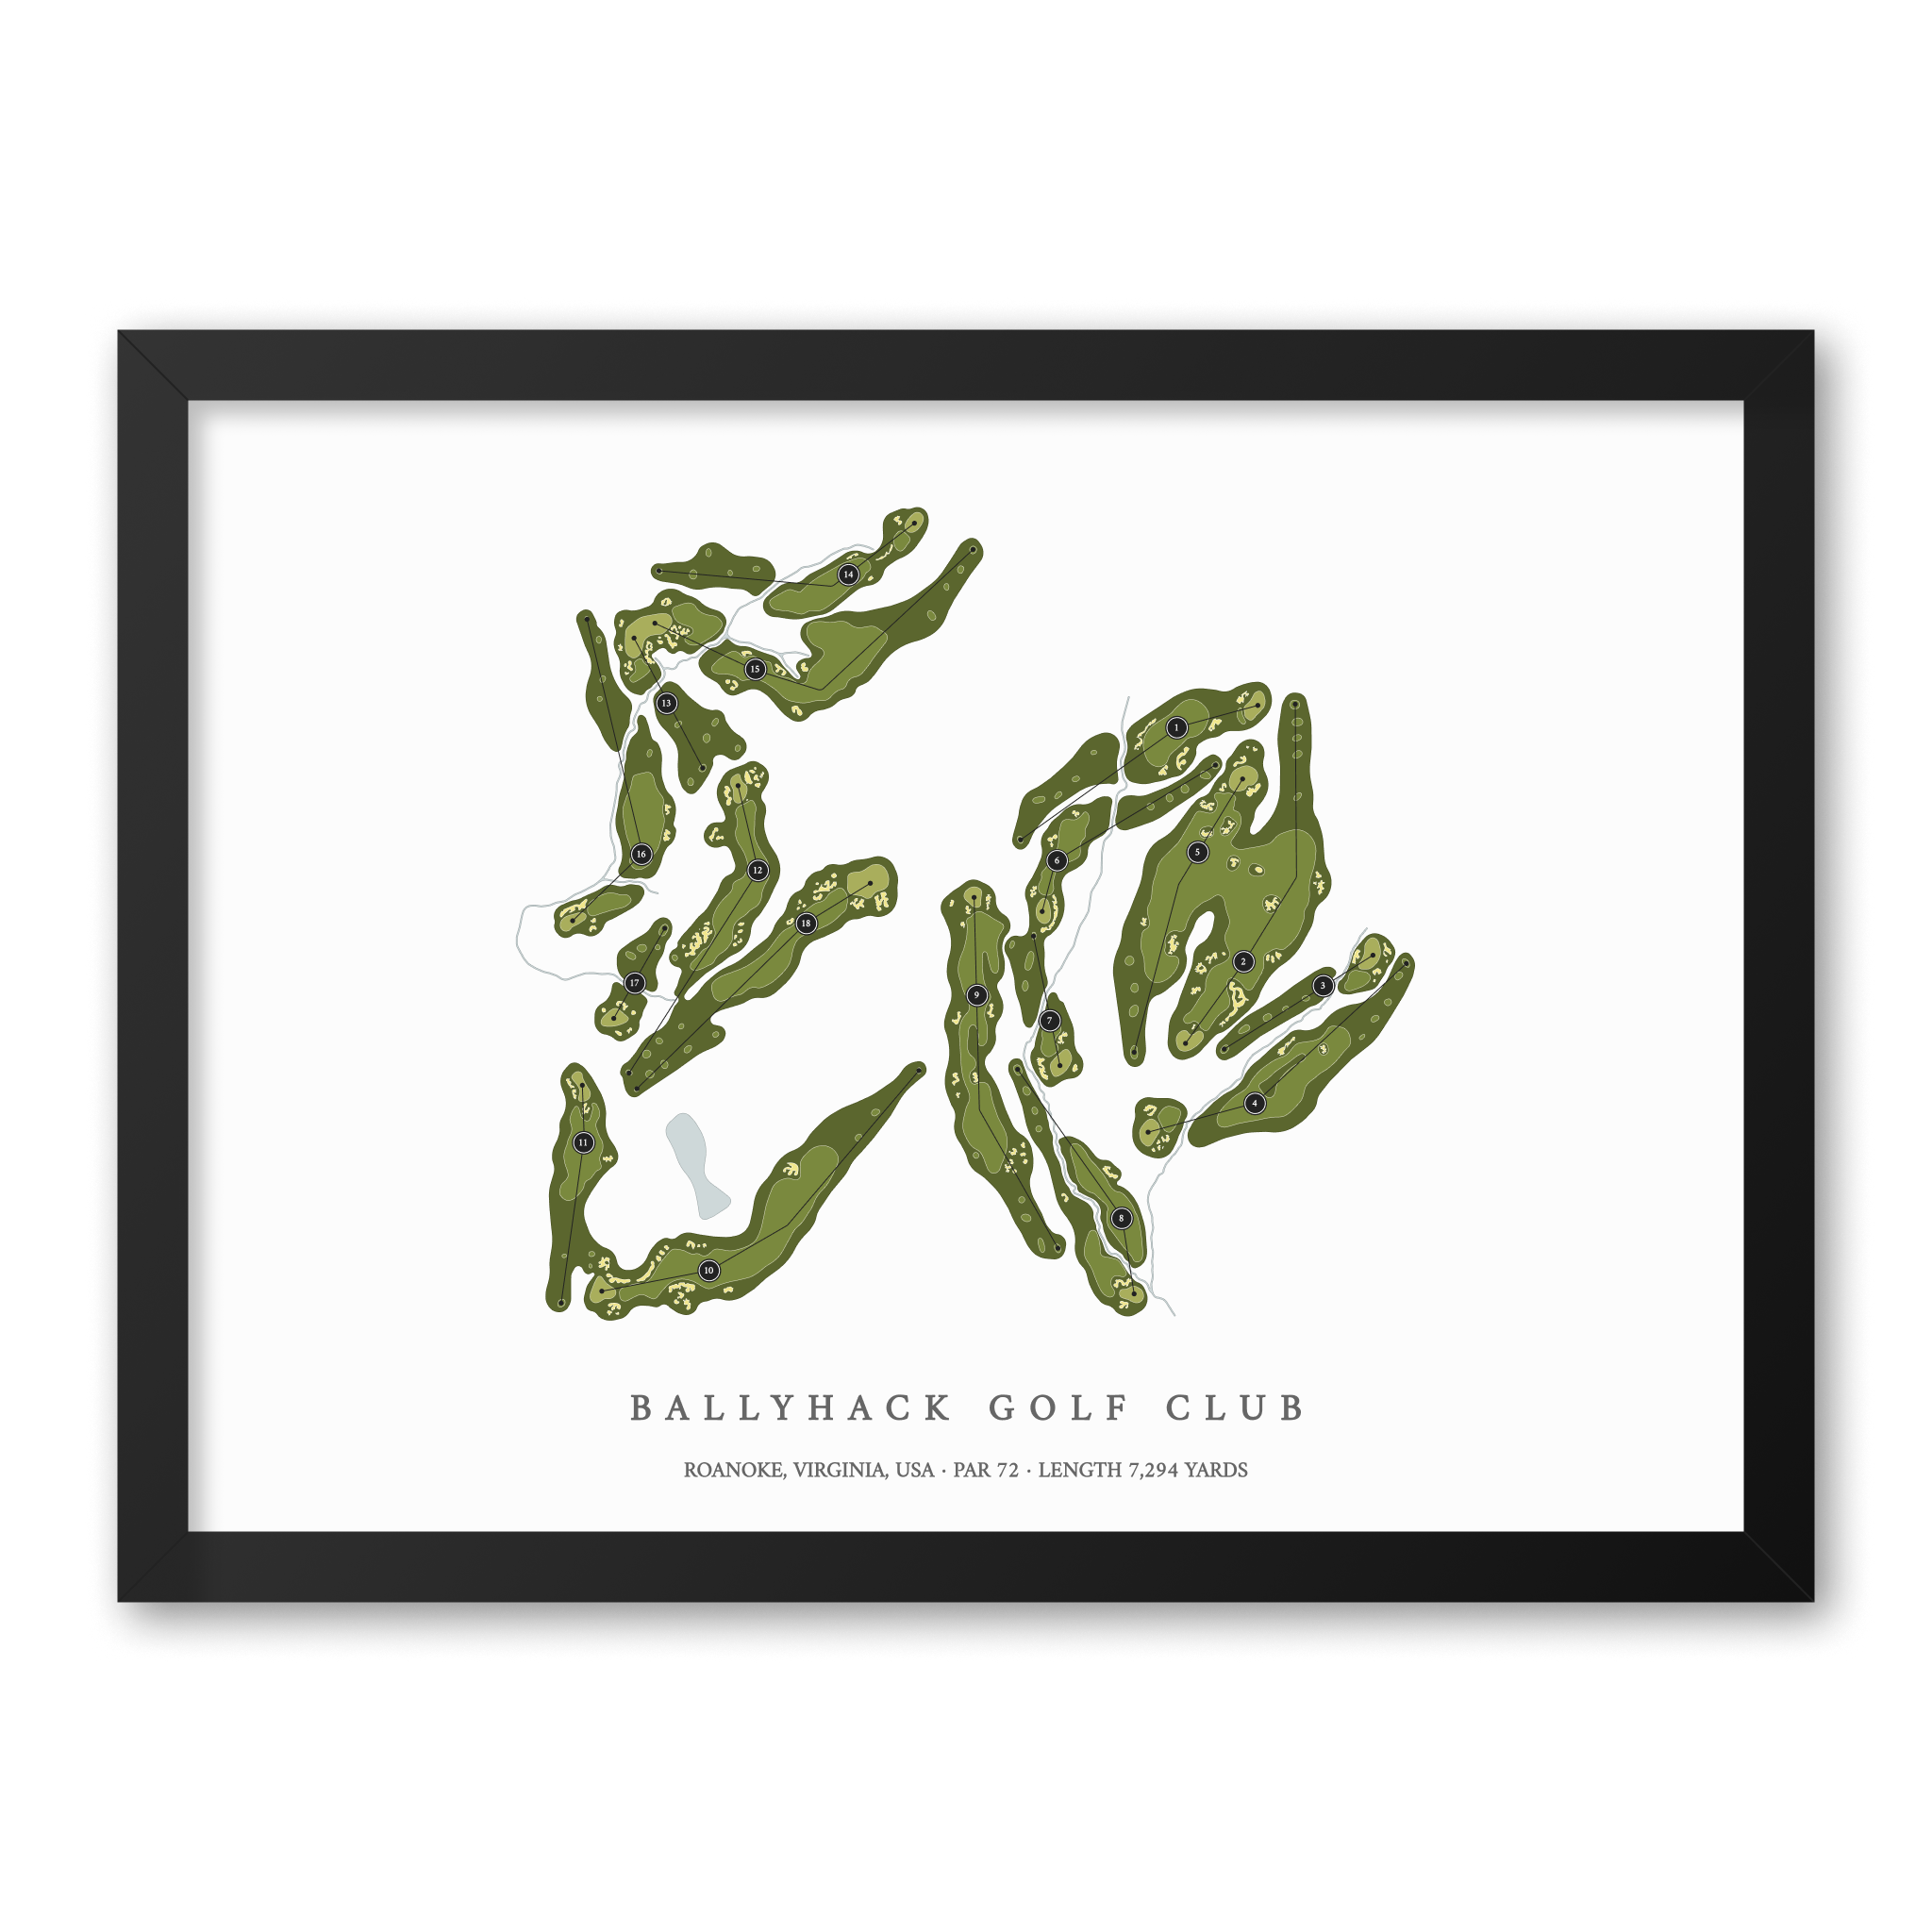 Ballyhack Golf Club| Golf Course Print | Black Frame With Hole Numbers #hole numbers_yes